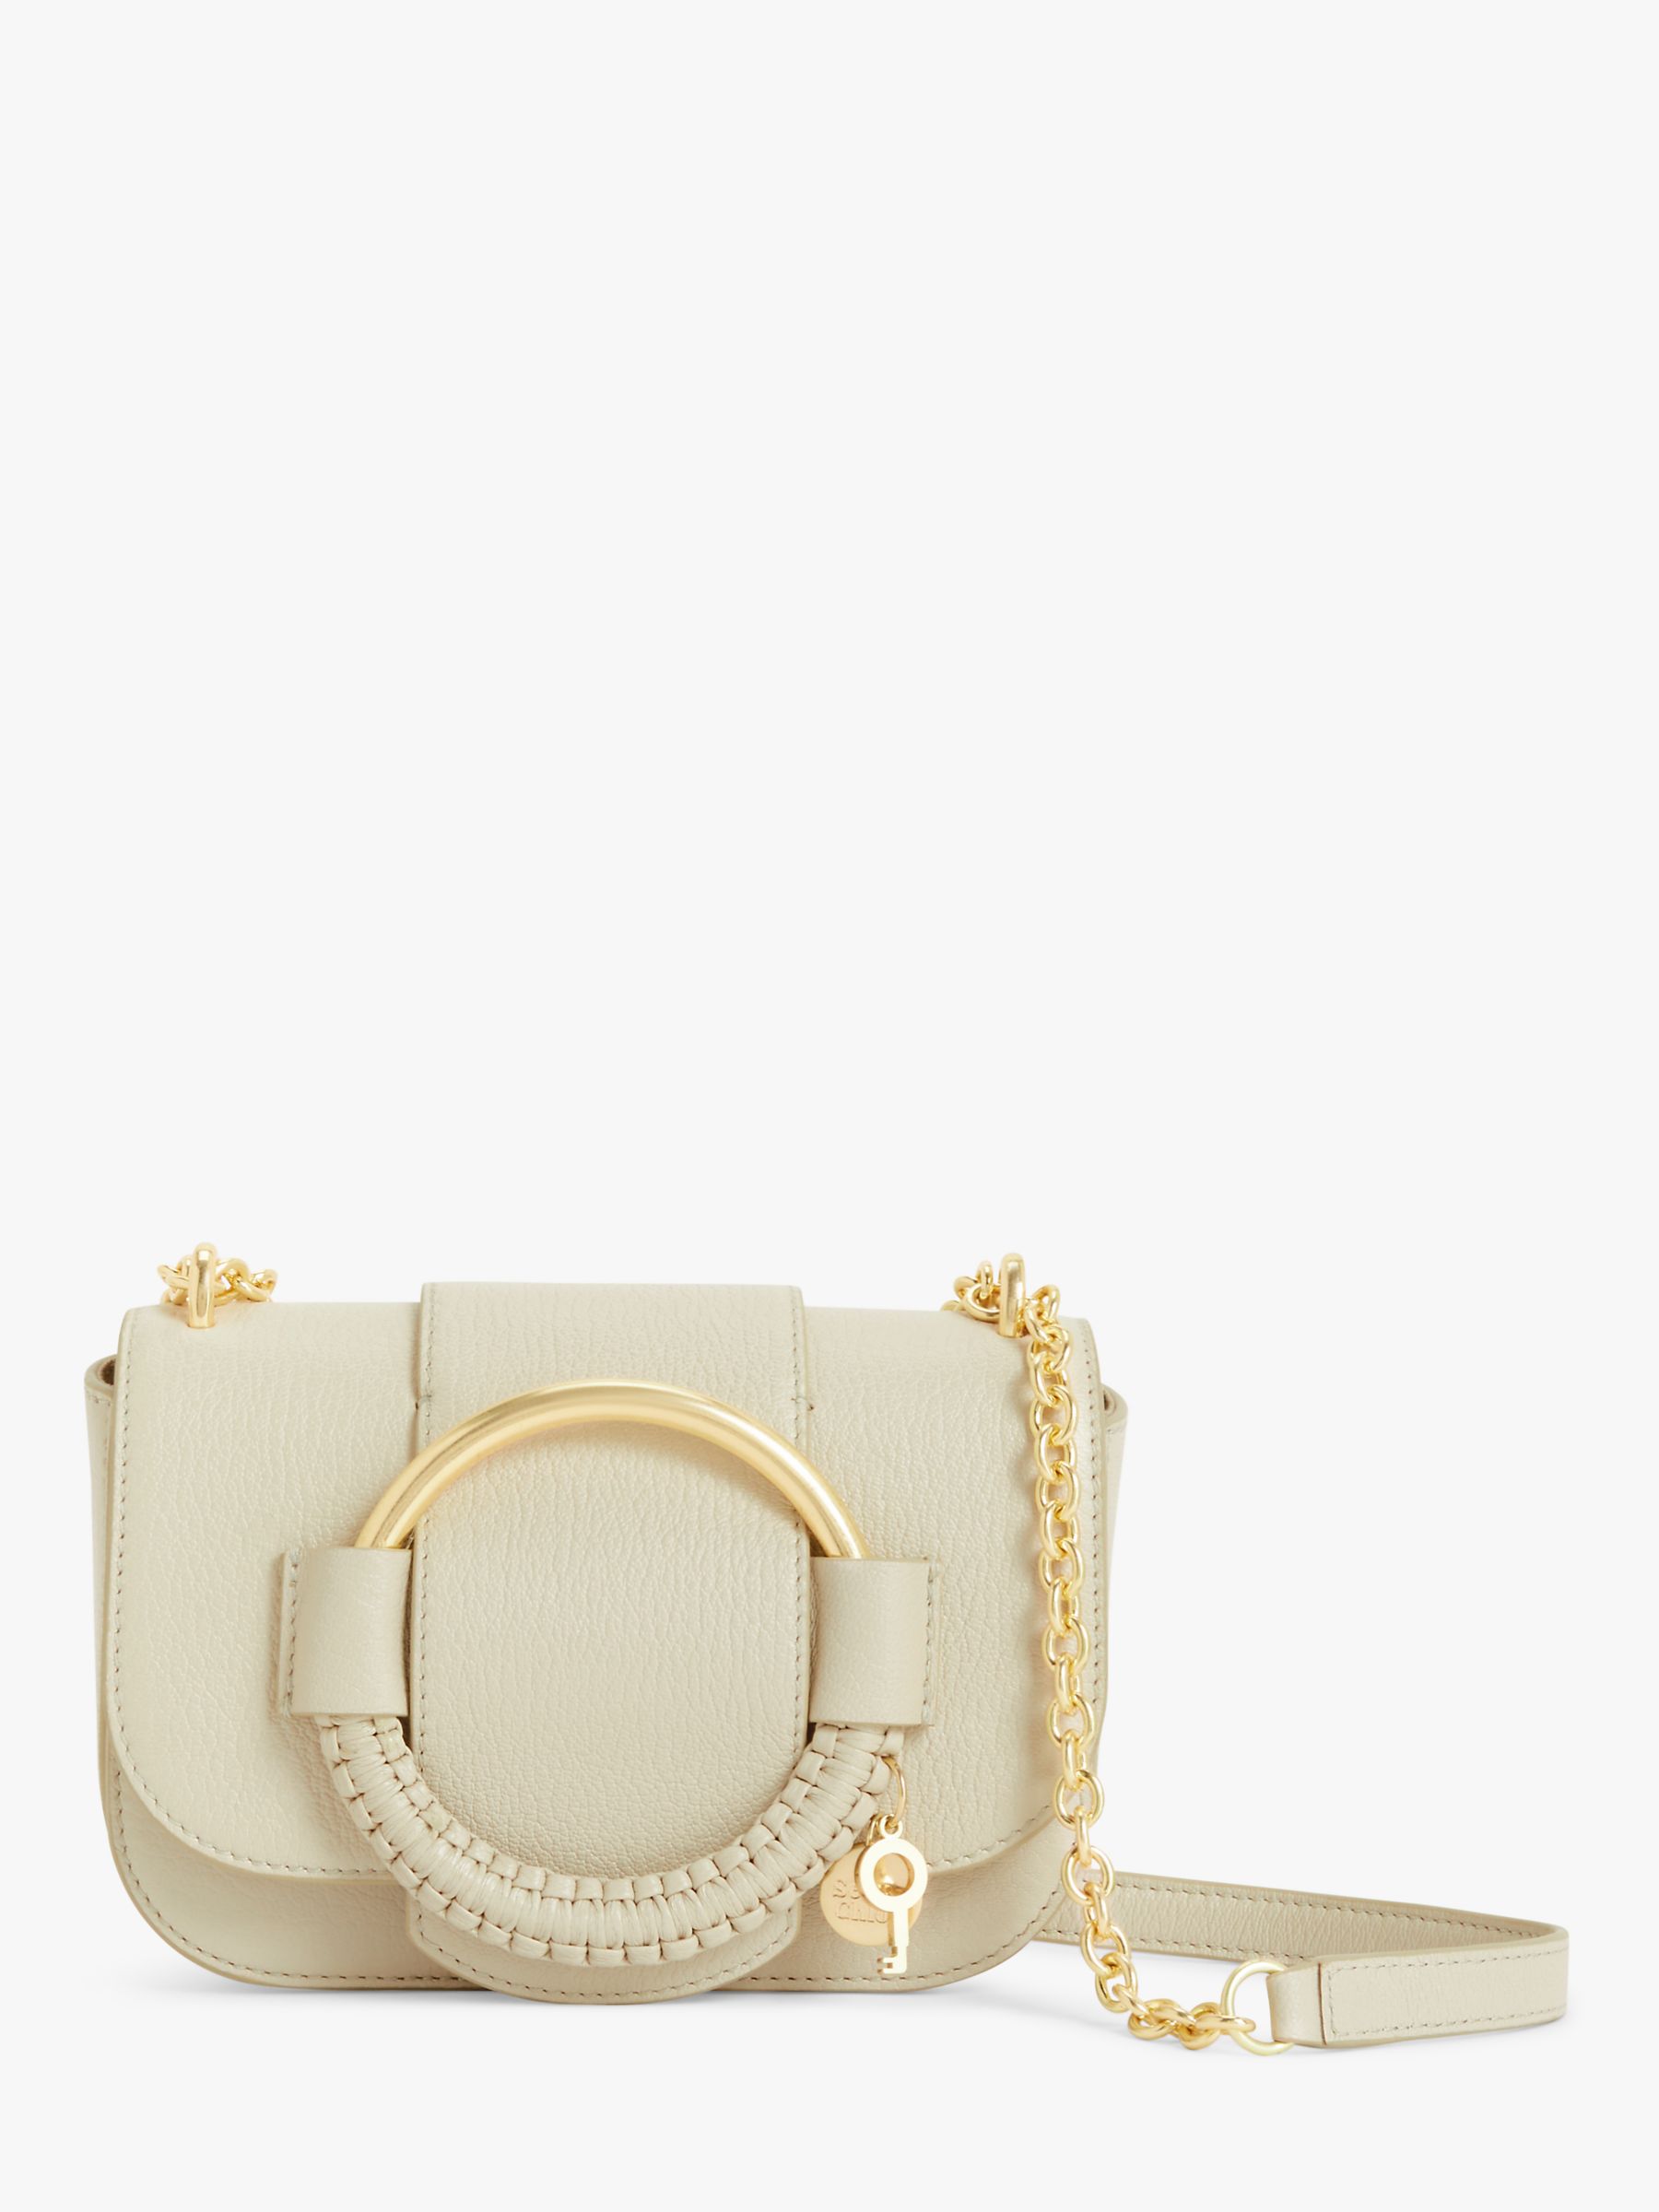 See By Chloé Hana Leather Chain Bag, Cement Beige at John Lewis & Partners